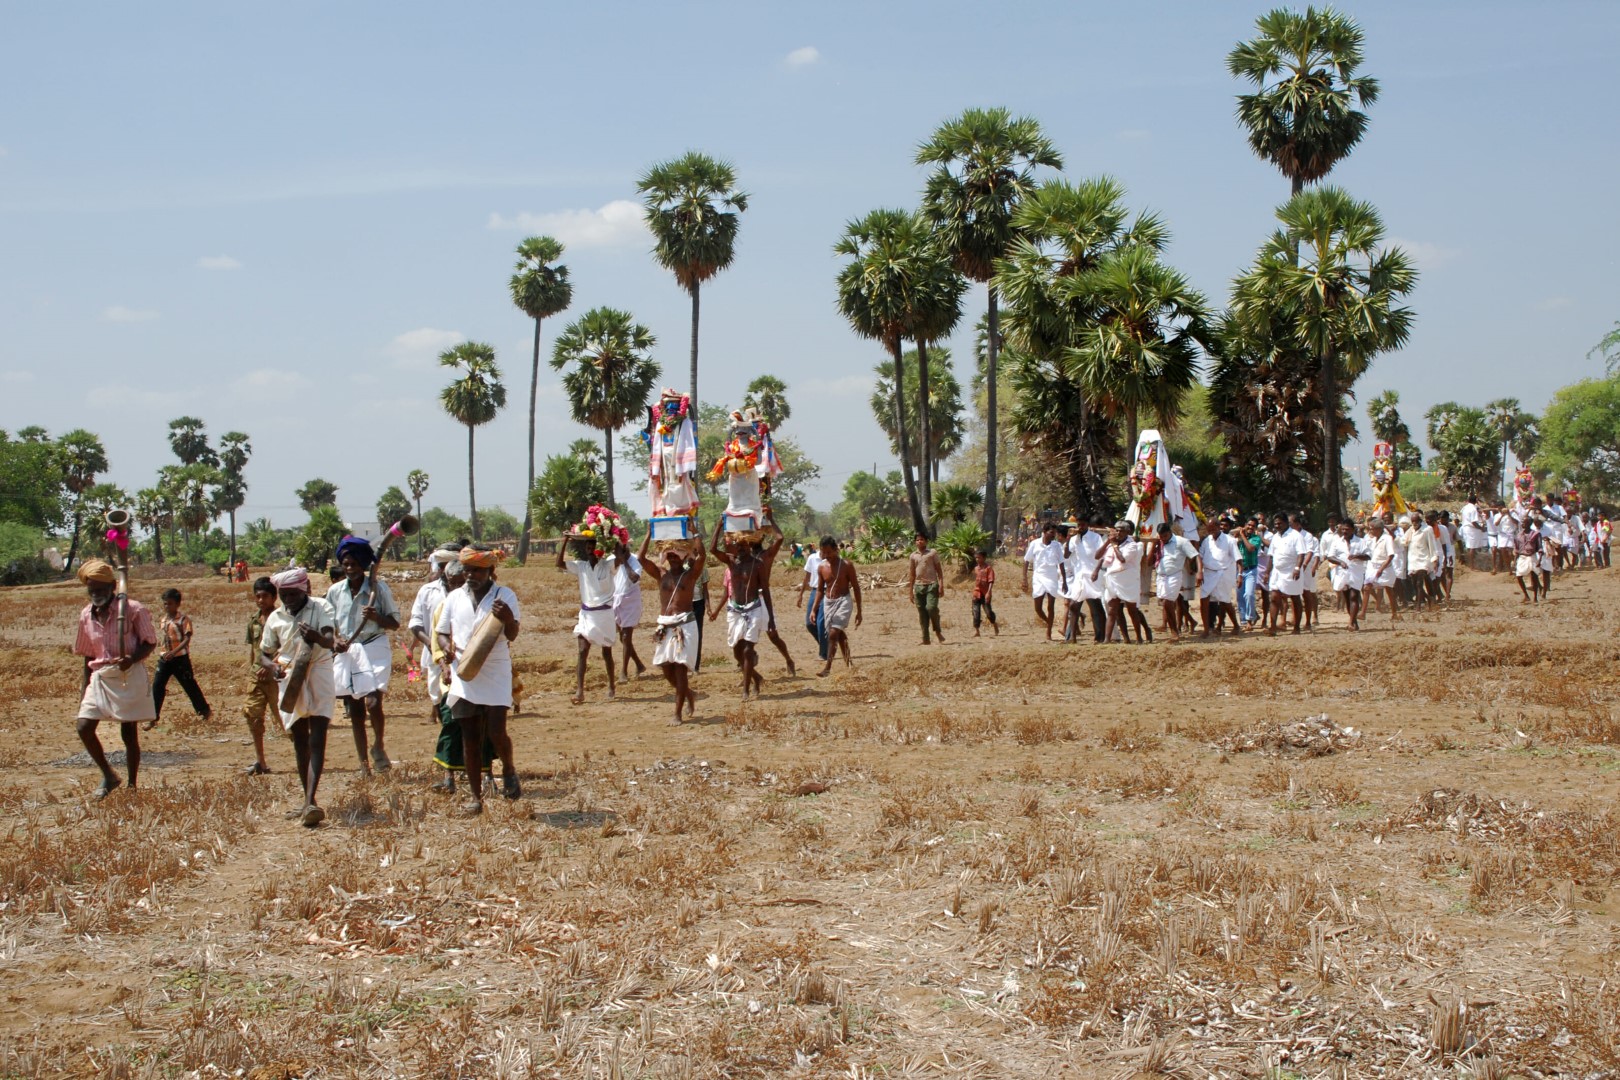 <span style="font-weight:normal;">Carrying offerings through the dried paddy-fields towards the shrine.</span>